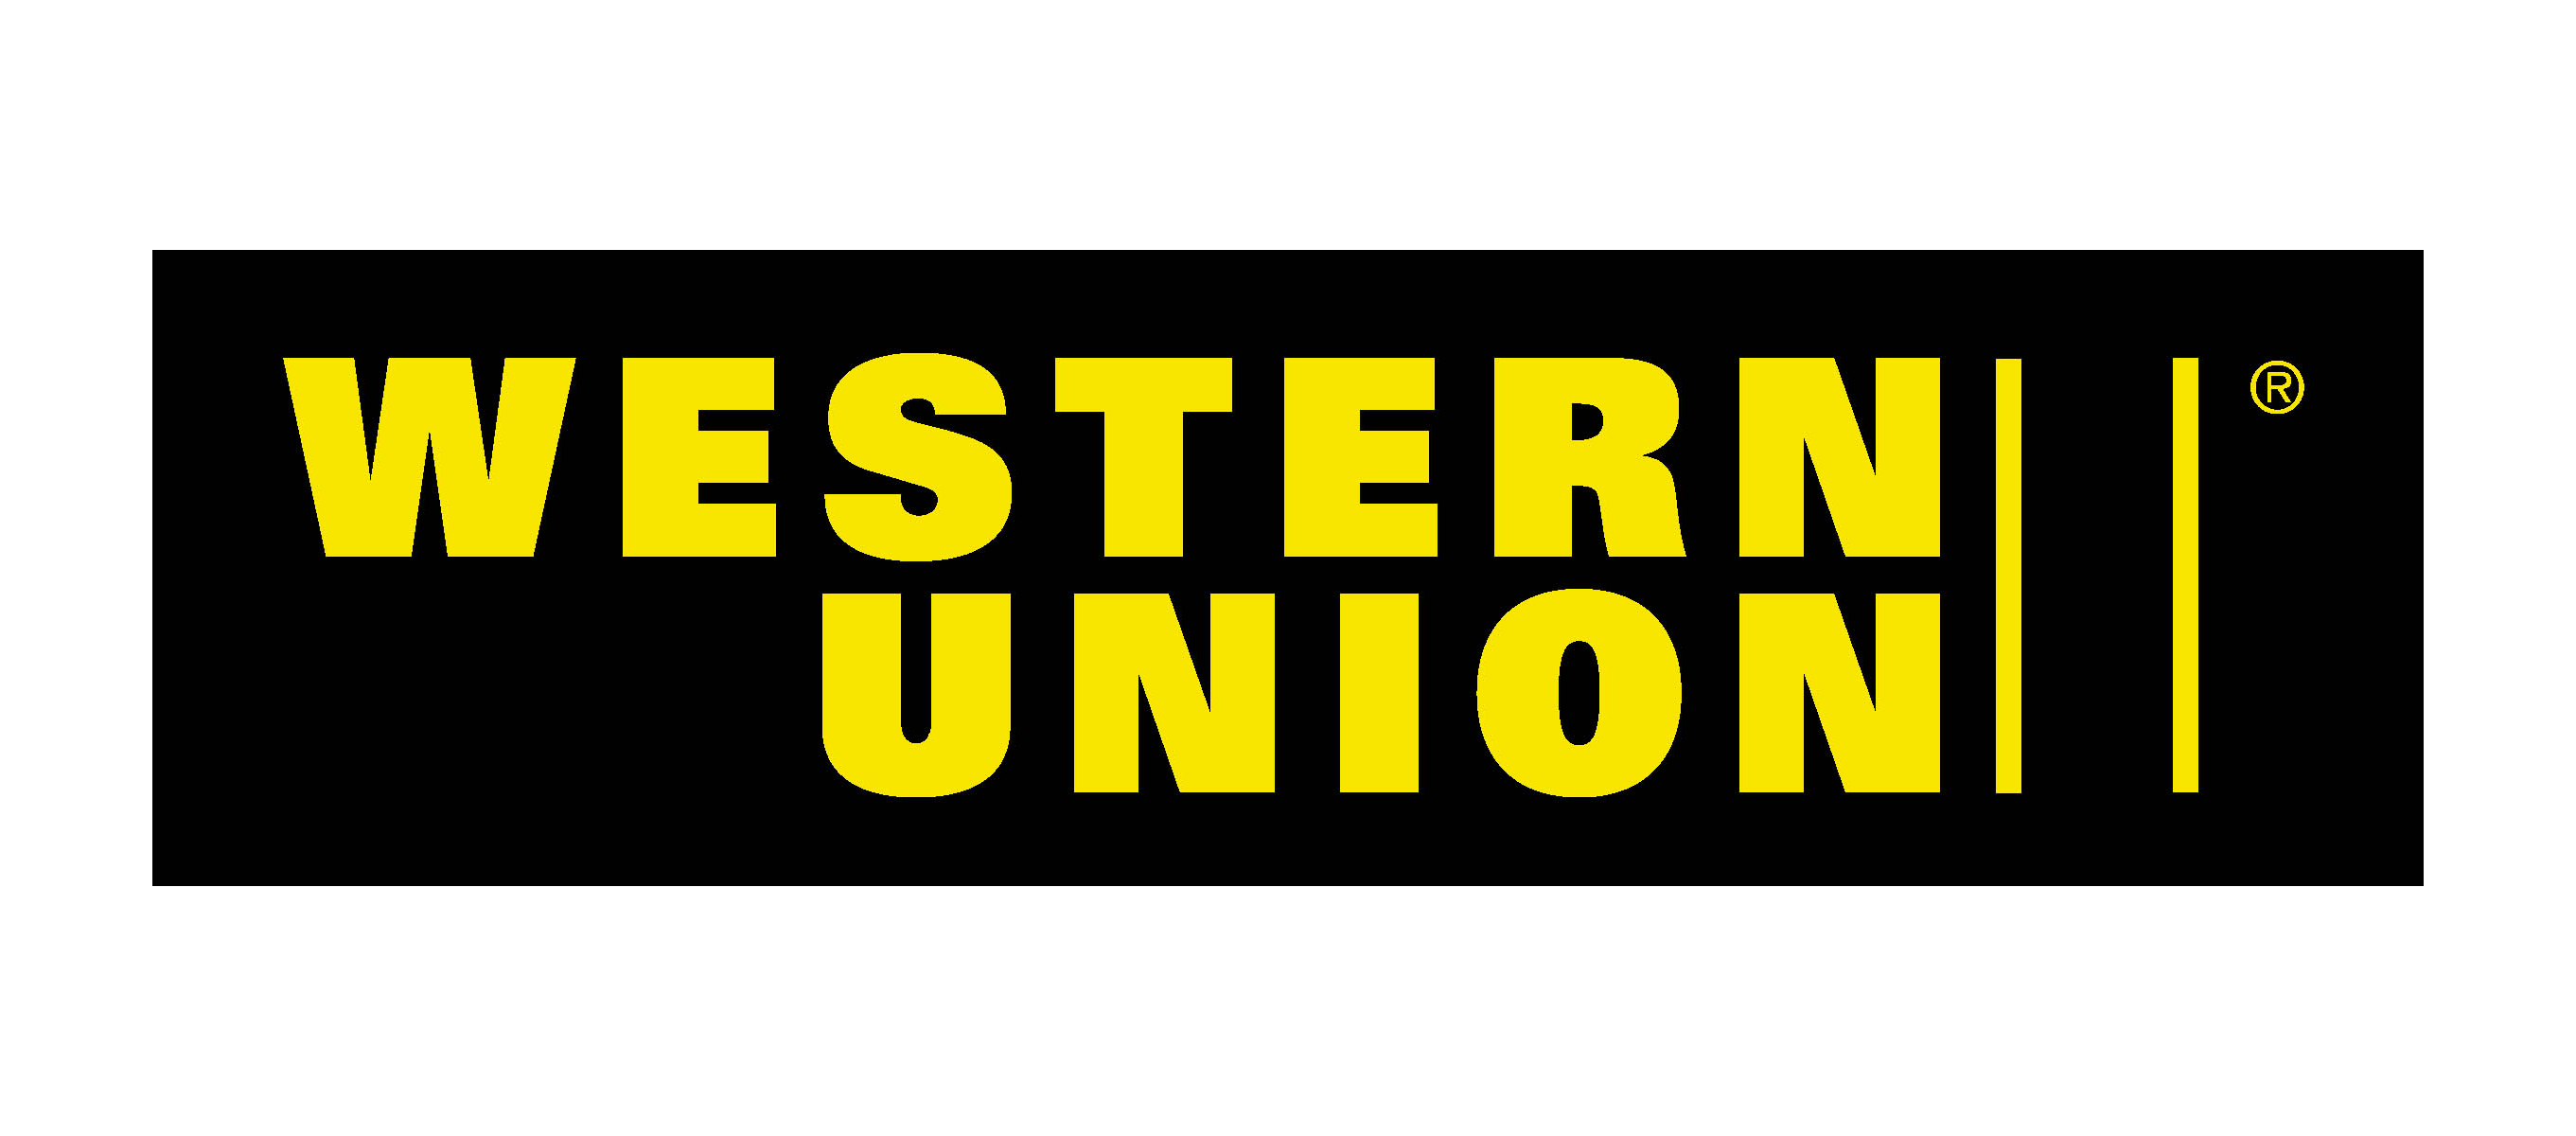 Western Union Digital Expands to Seven Countries Across the Middle East